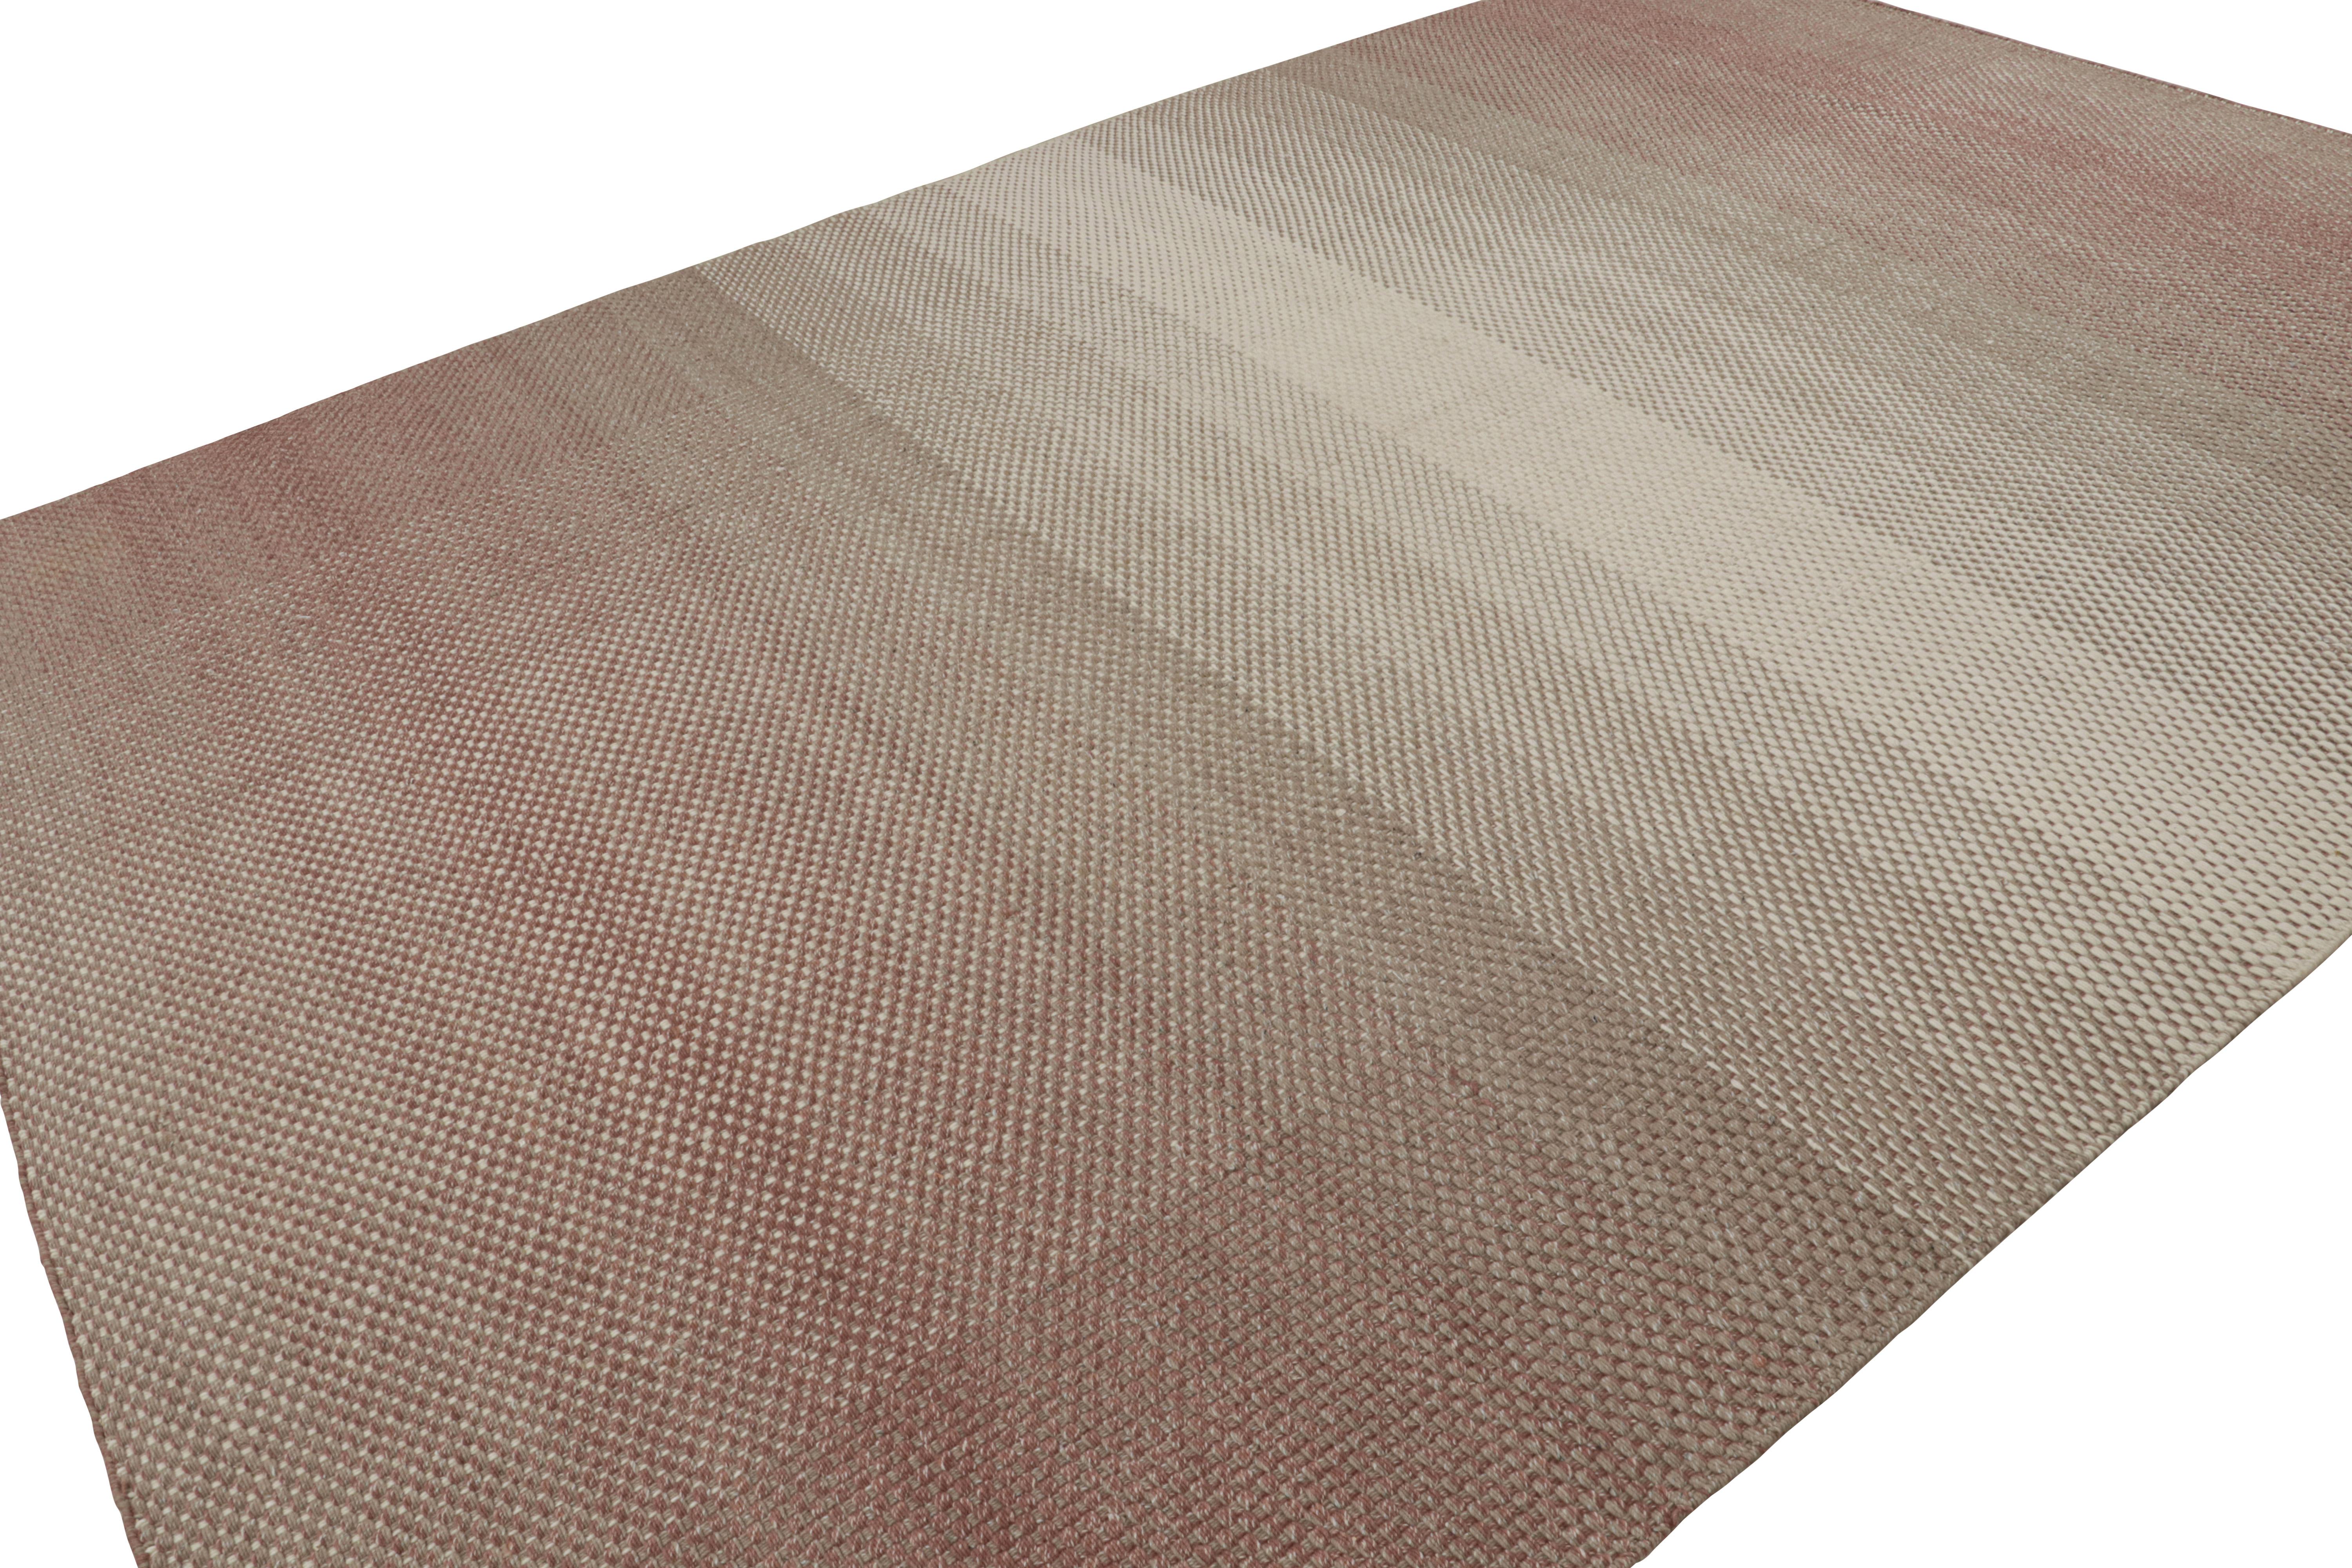 This 9×13 flat weave is an exciting new addition to the “Smartloom” texture in Rug & Kilim’s Scandinavian Collection.

On the Design:

Handwoven in a durable semi-vested wool, this new flat weave technique enjoys a unique texture and bold ombre